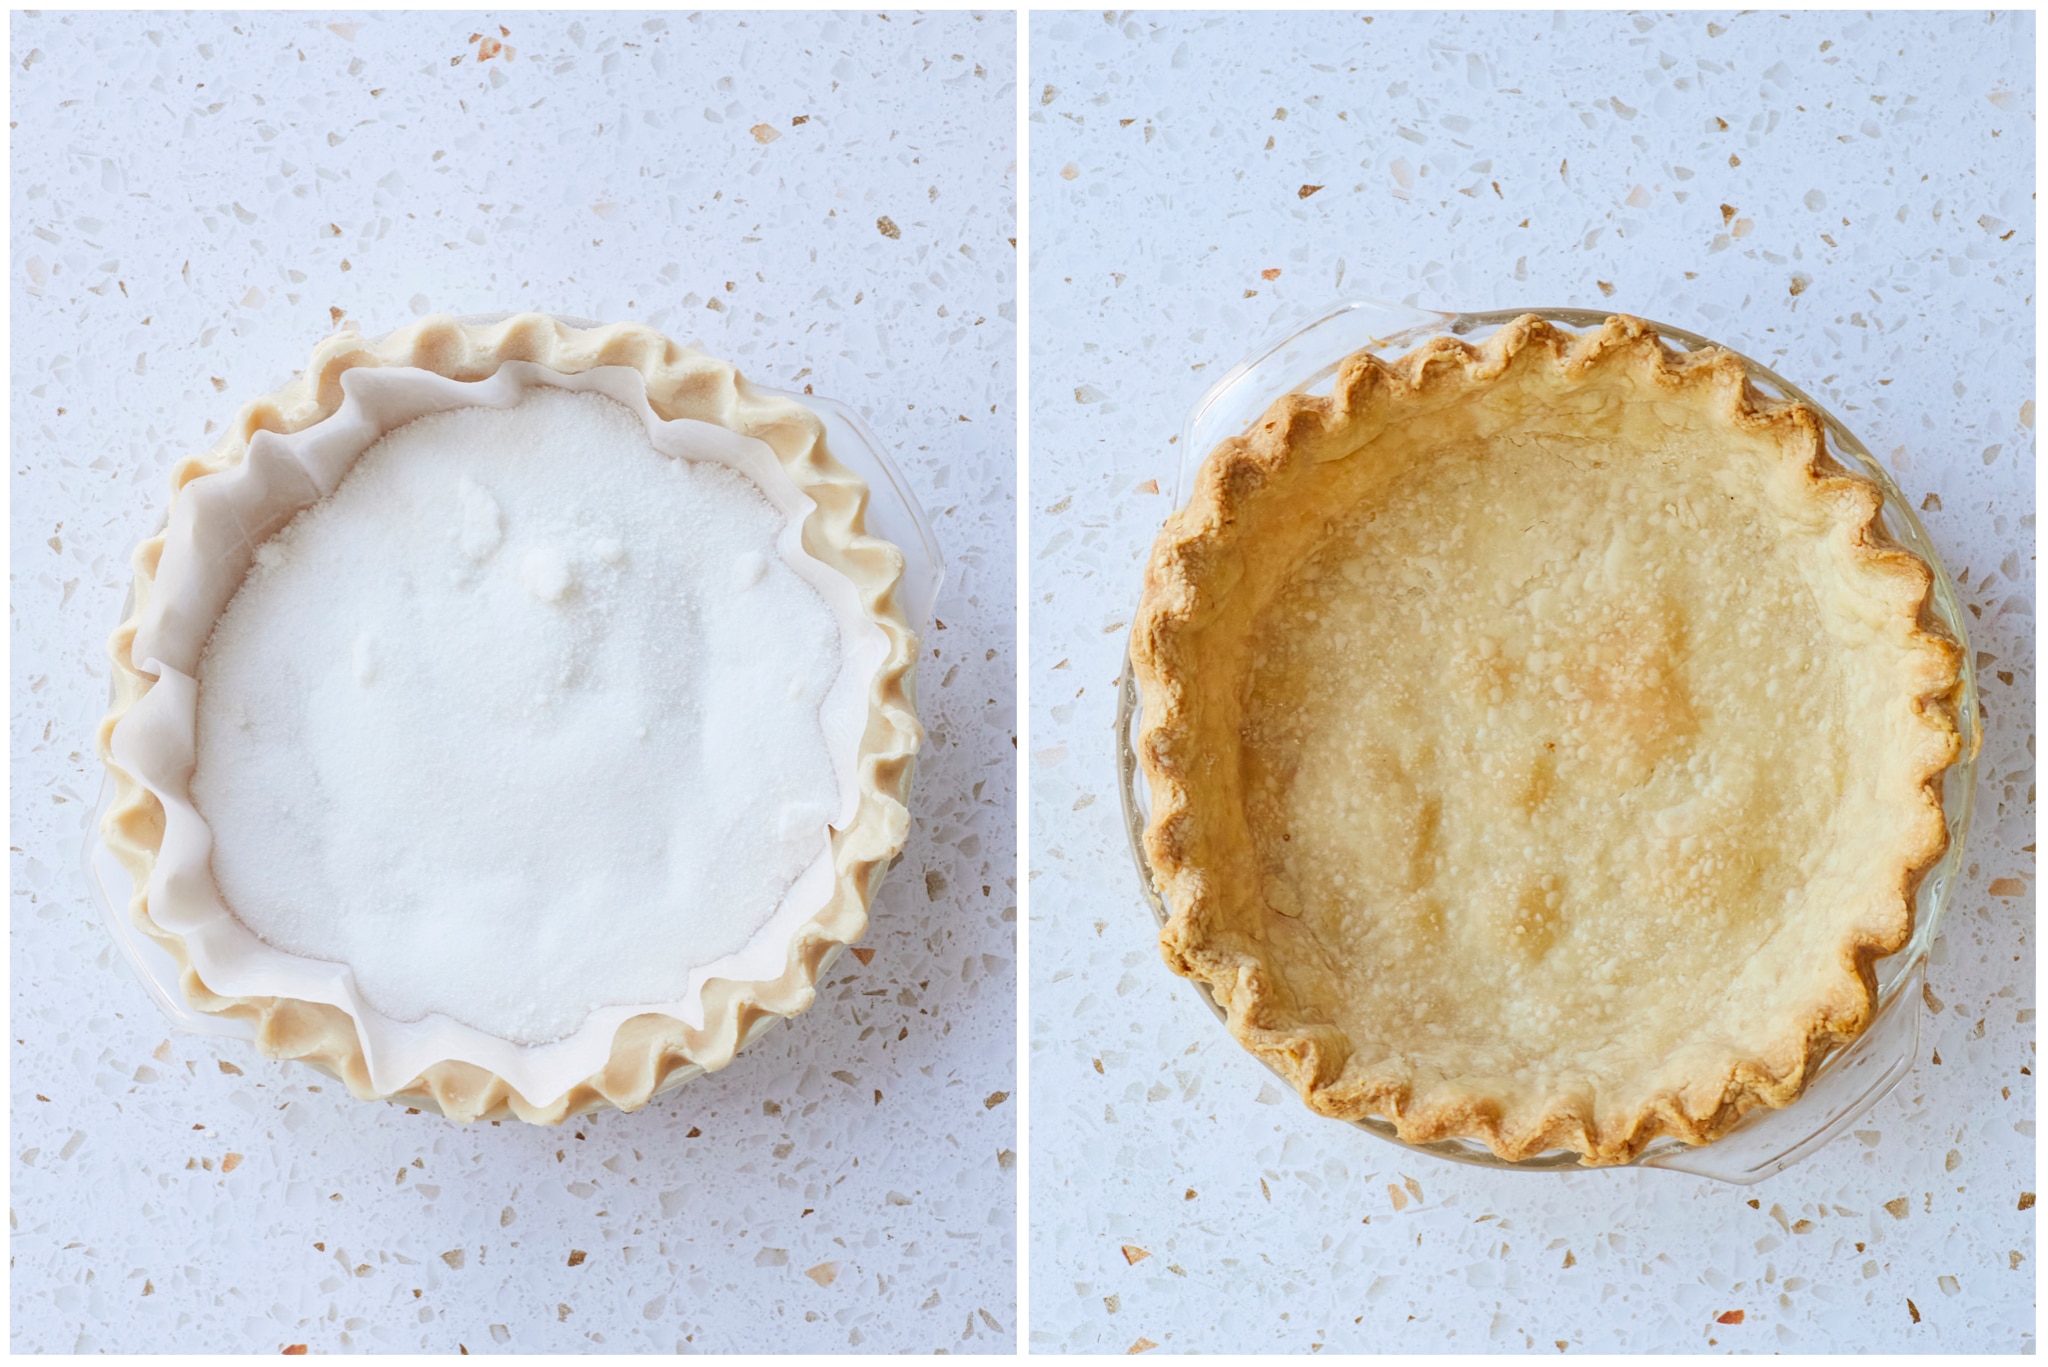 Homemade Buttermilk Pie Crust is shown in a side-by-side photo. On the left, it is unbaked and covered in parchment paper and sugar, serving as pie weights. On the right, the crust is baked and golden brown.